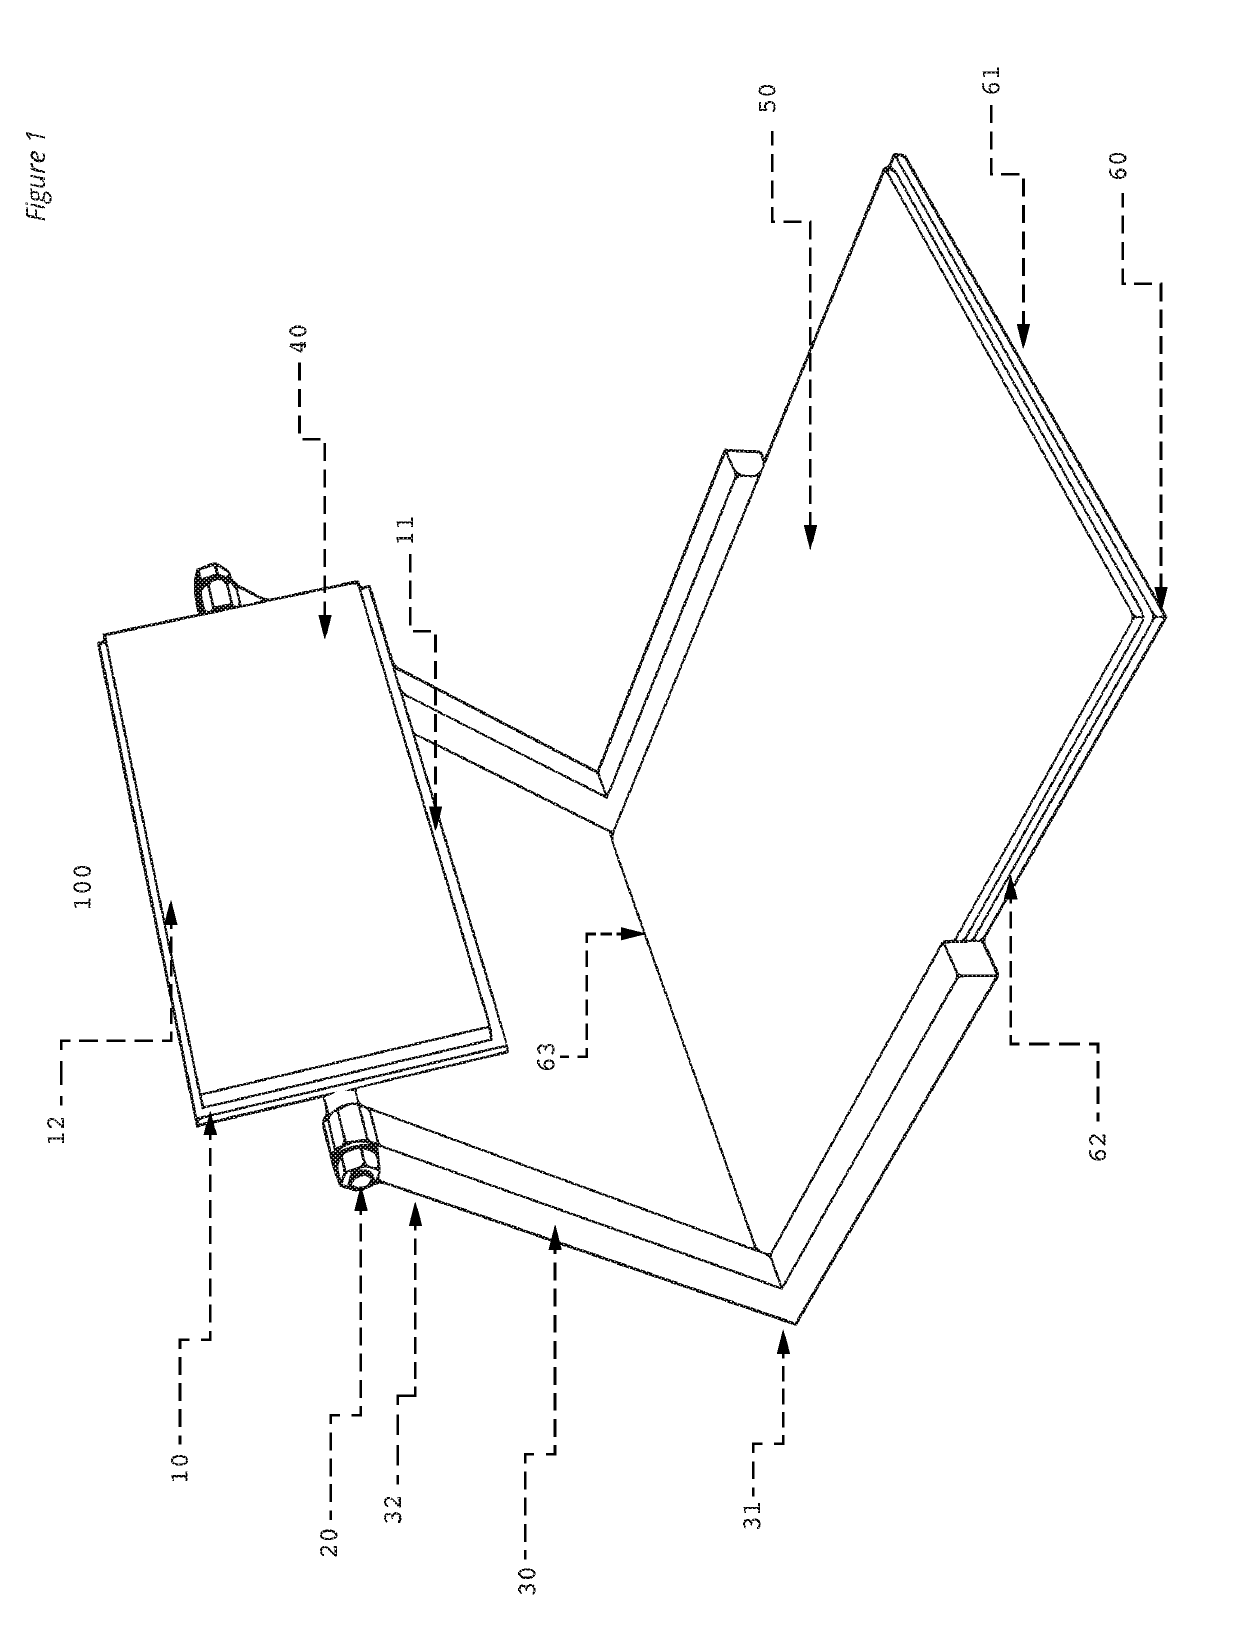 Assistive device for standing tasks